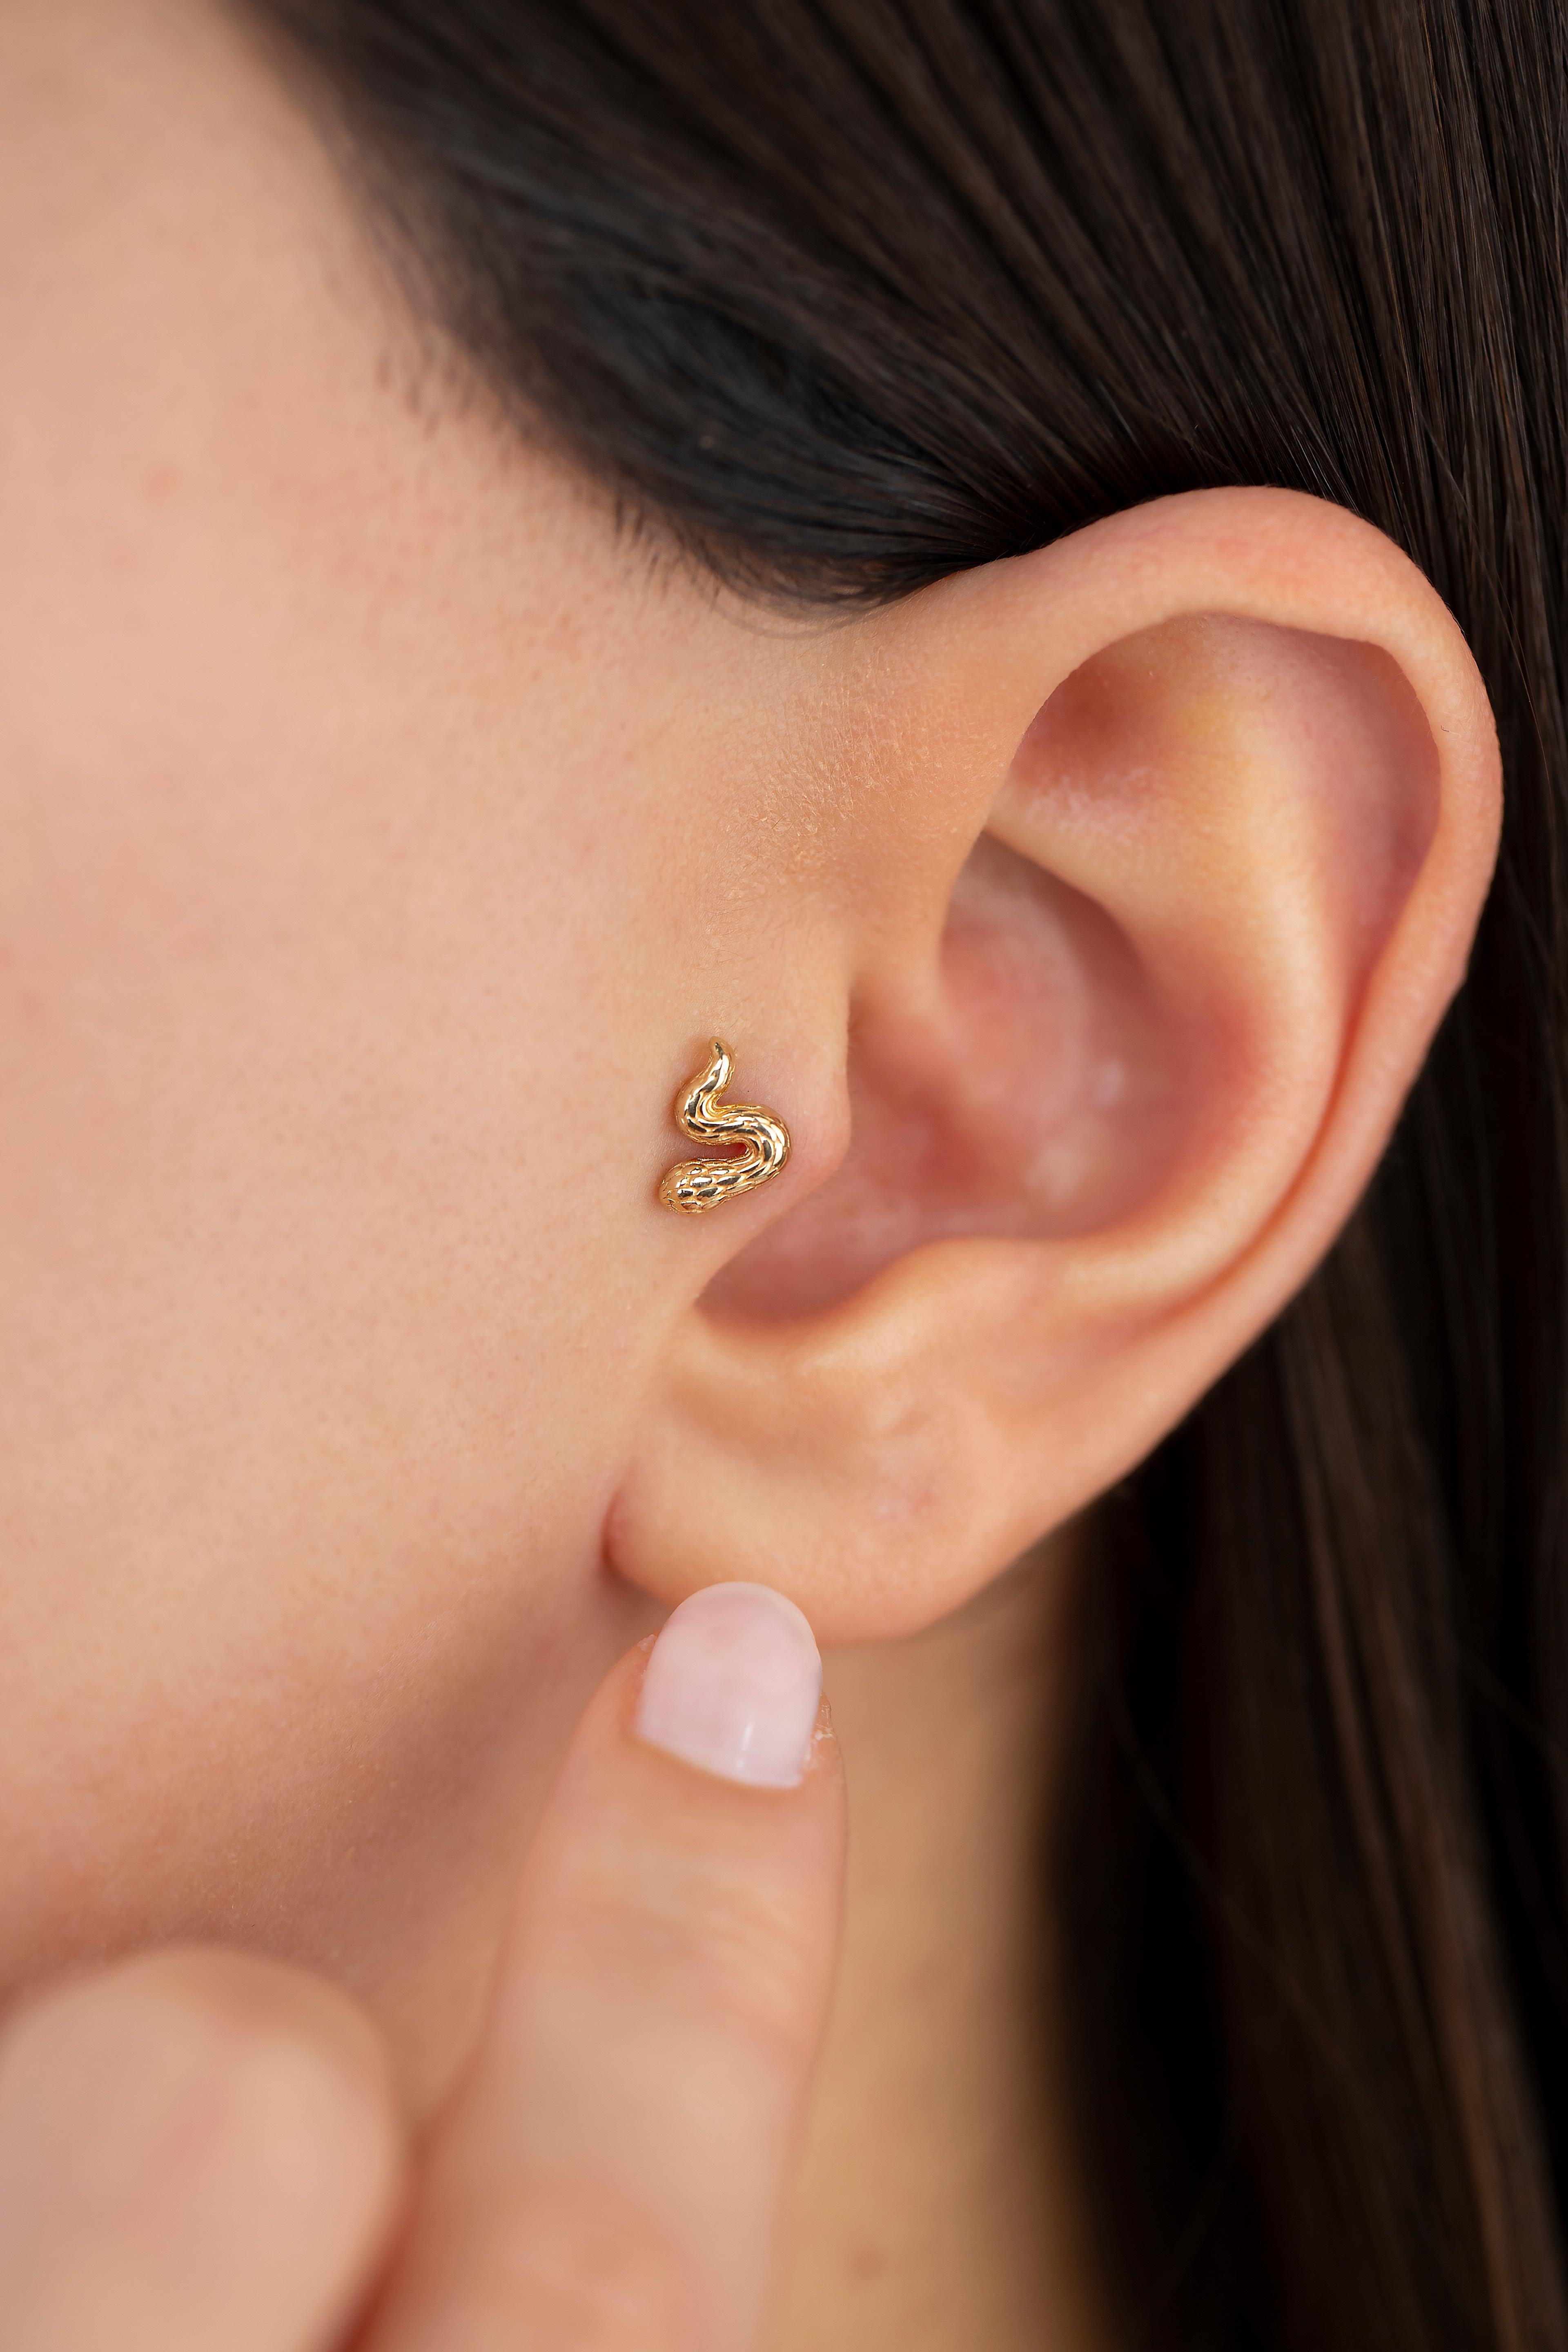 14K Gold Cute Serpent Piercing, Bold Snake Gold Stud Earring

You can use the piercing as an earring too! Also this piercing is suitable for tragus, nose, helix, lobe, flat, medusa, monreo, labret and stud.

This piercing was made with quality